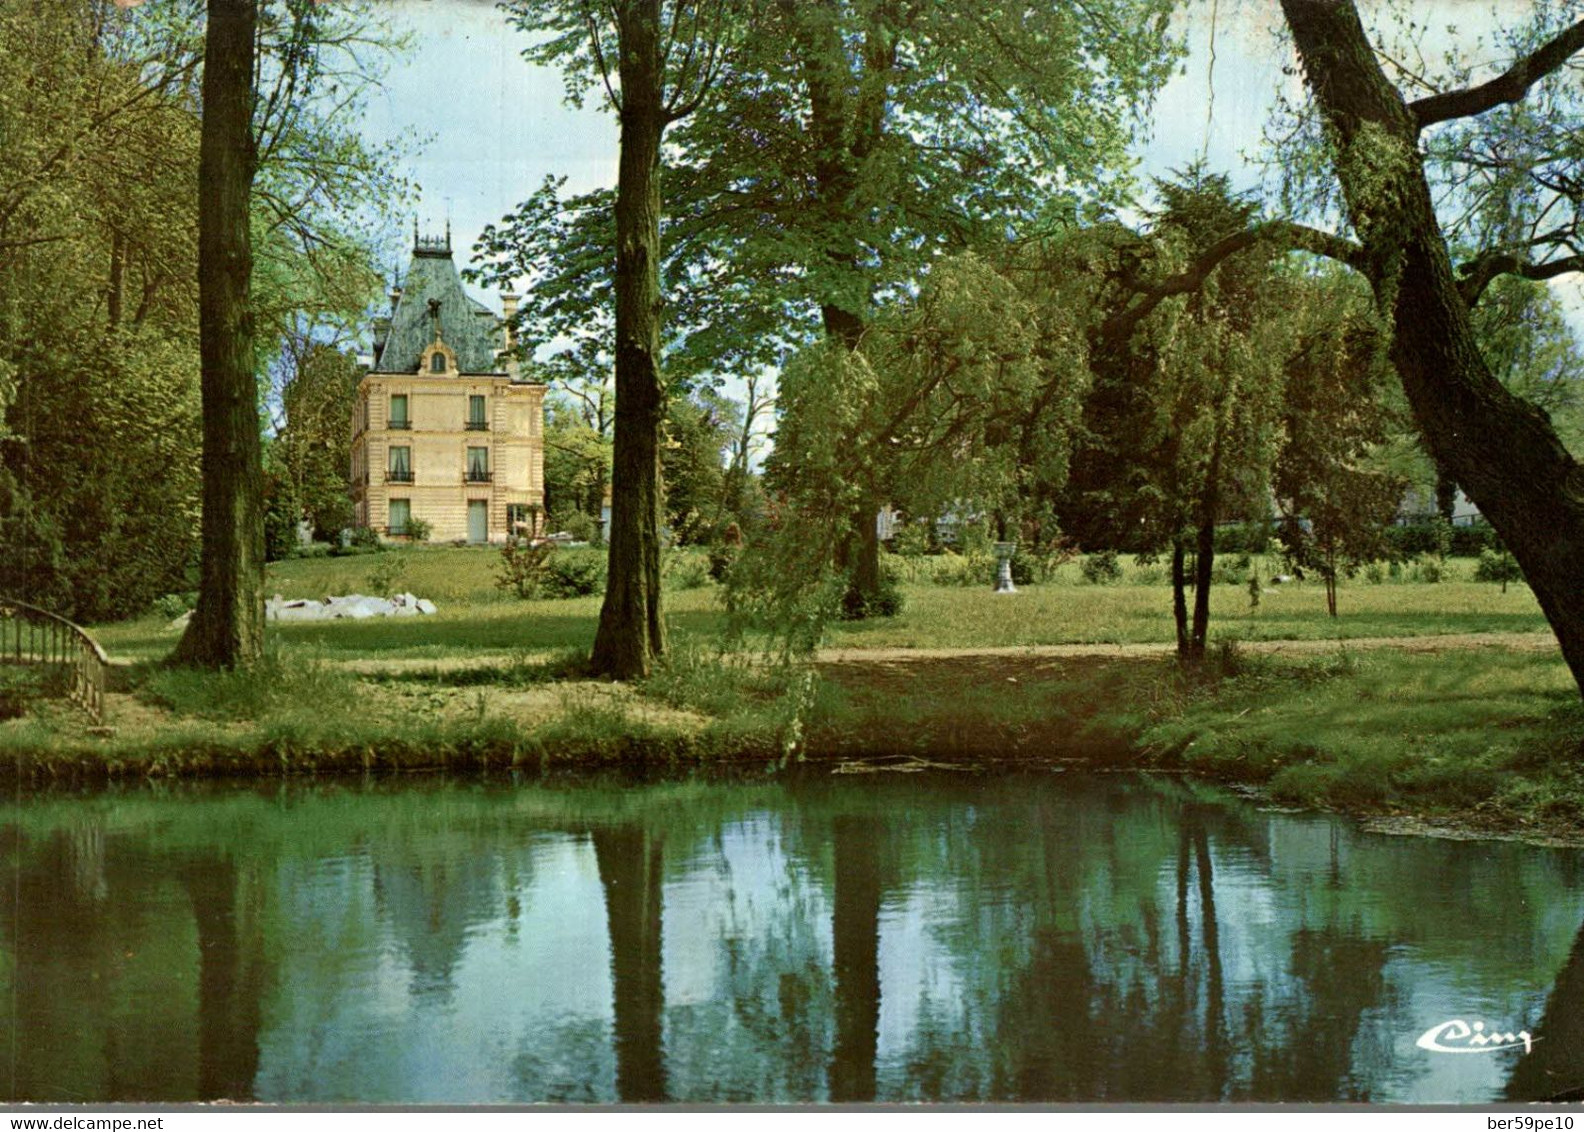 91 CHILLY MAZARIN LE CHATEAU A TRAVERS LE PARC - Chilly Mazarin